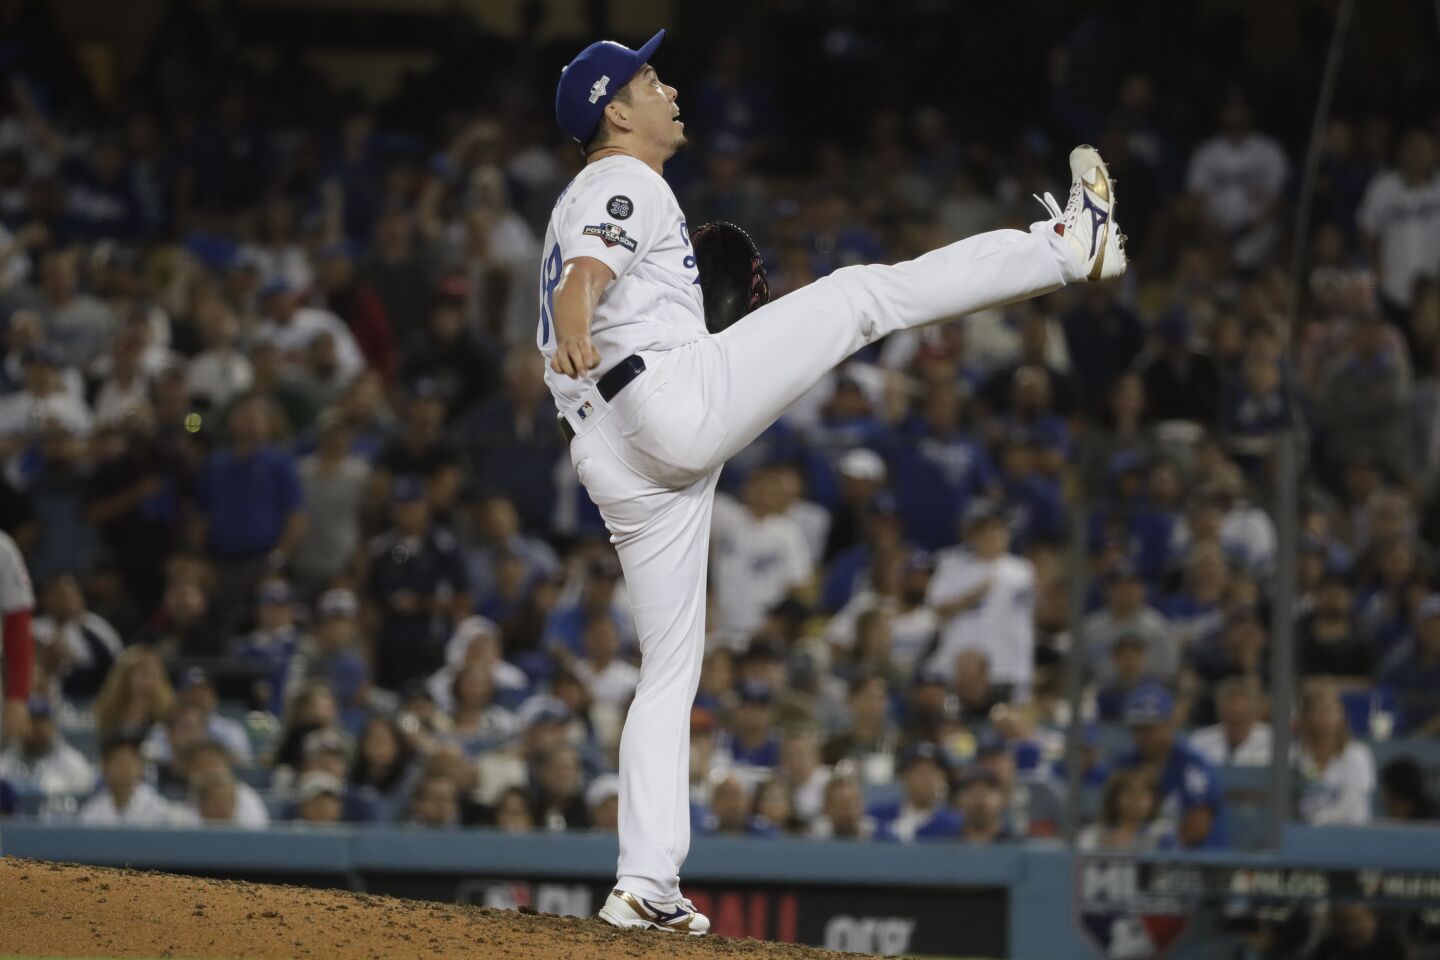 Dodgers reliever Kenta Maeda reacts to a popup during the seventh inning against the Washington Nationals.